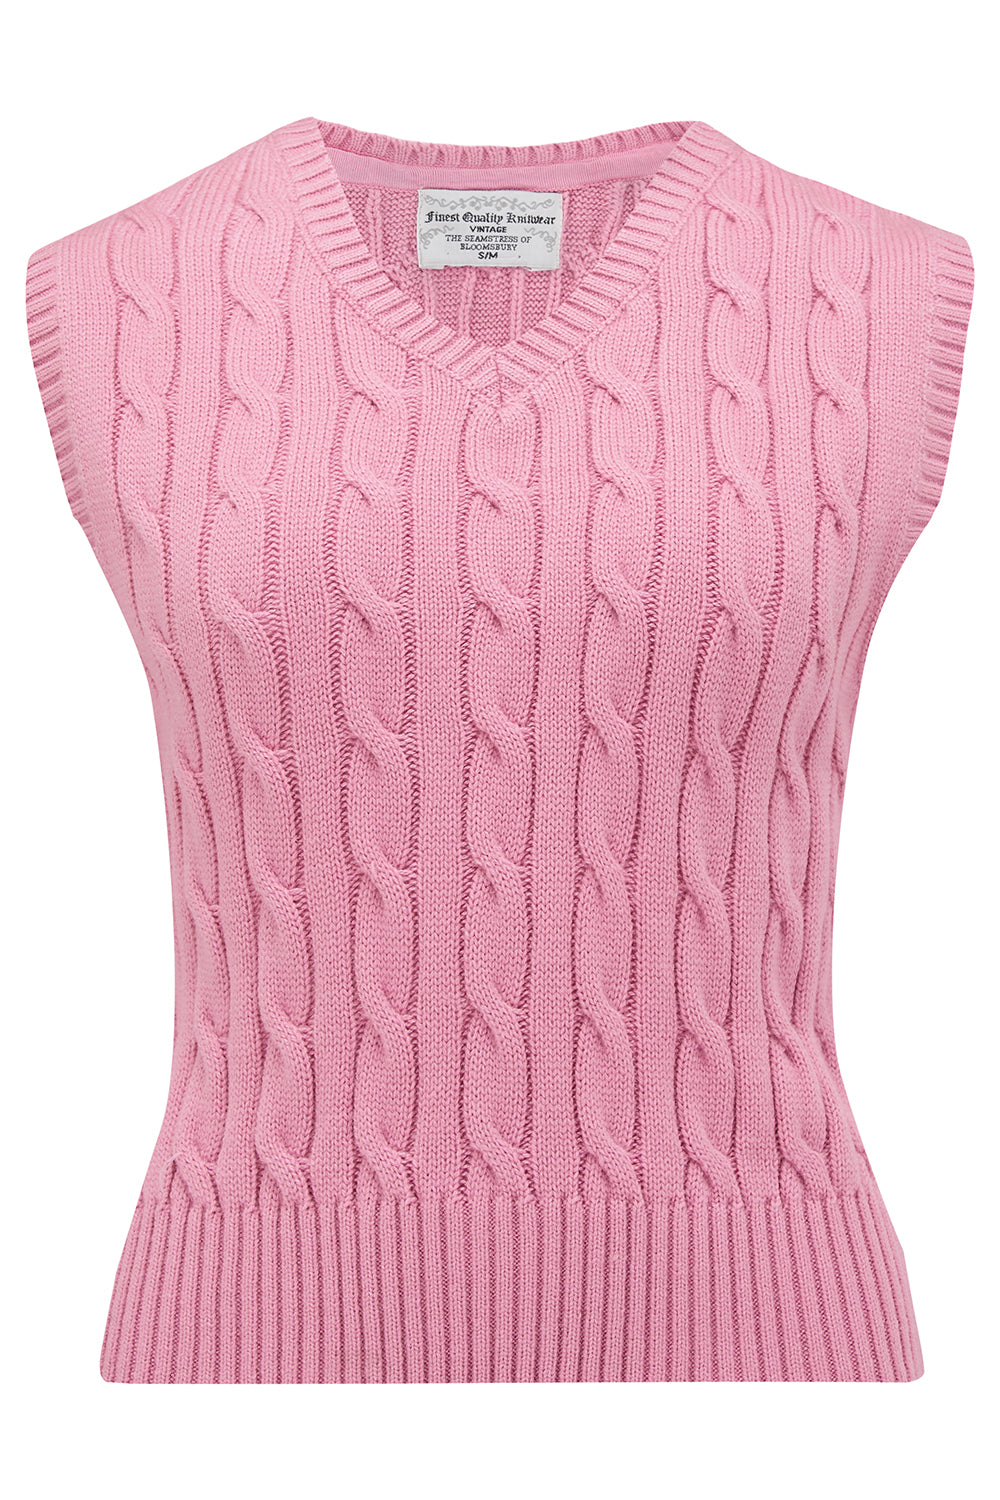 Cable Knit Slipover in Pink , Stunning 1940s True Vintage Style - CC41, Goodwood Revival, Twinwood Festival, Viva Las Vegas Rockabilly Weekend Rock n Romance The Seamstress Of Bloomsbury